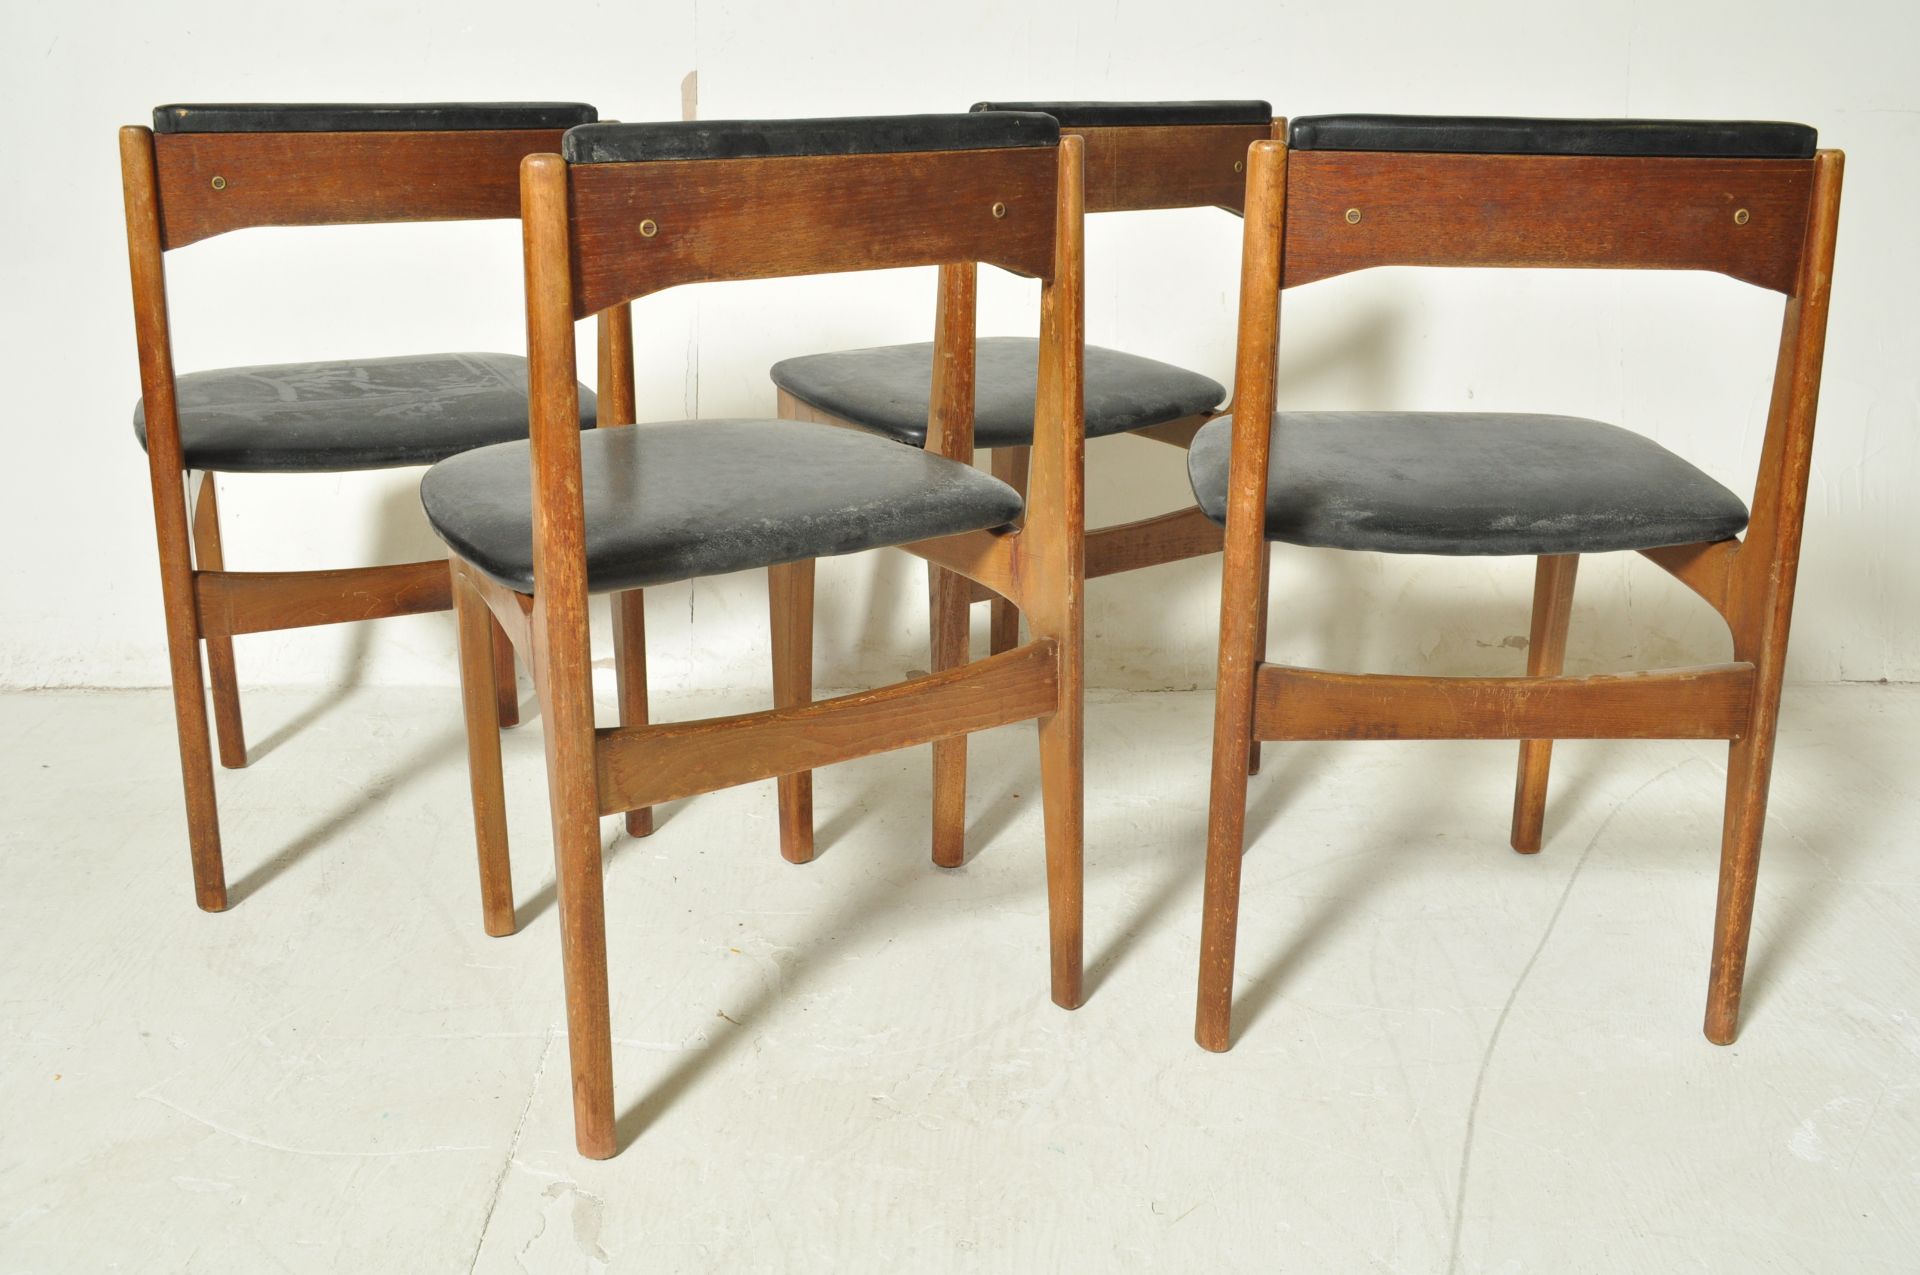 FOUR DANISH INSPIRED TEAK WOOD AND BLACK VINYL DINING CHAIRS - Image 5 of 6